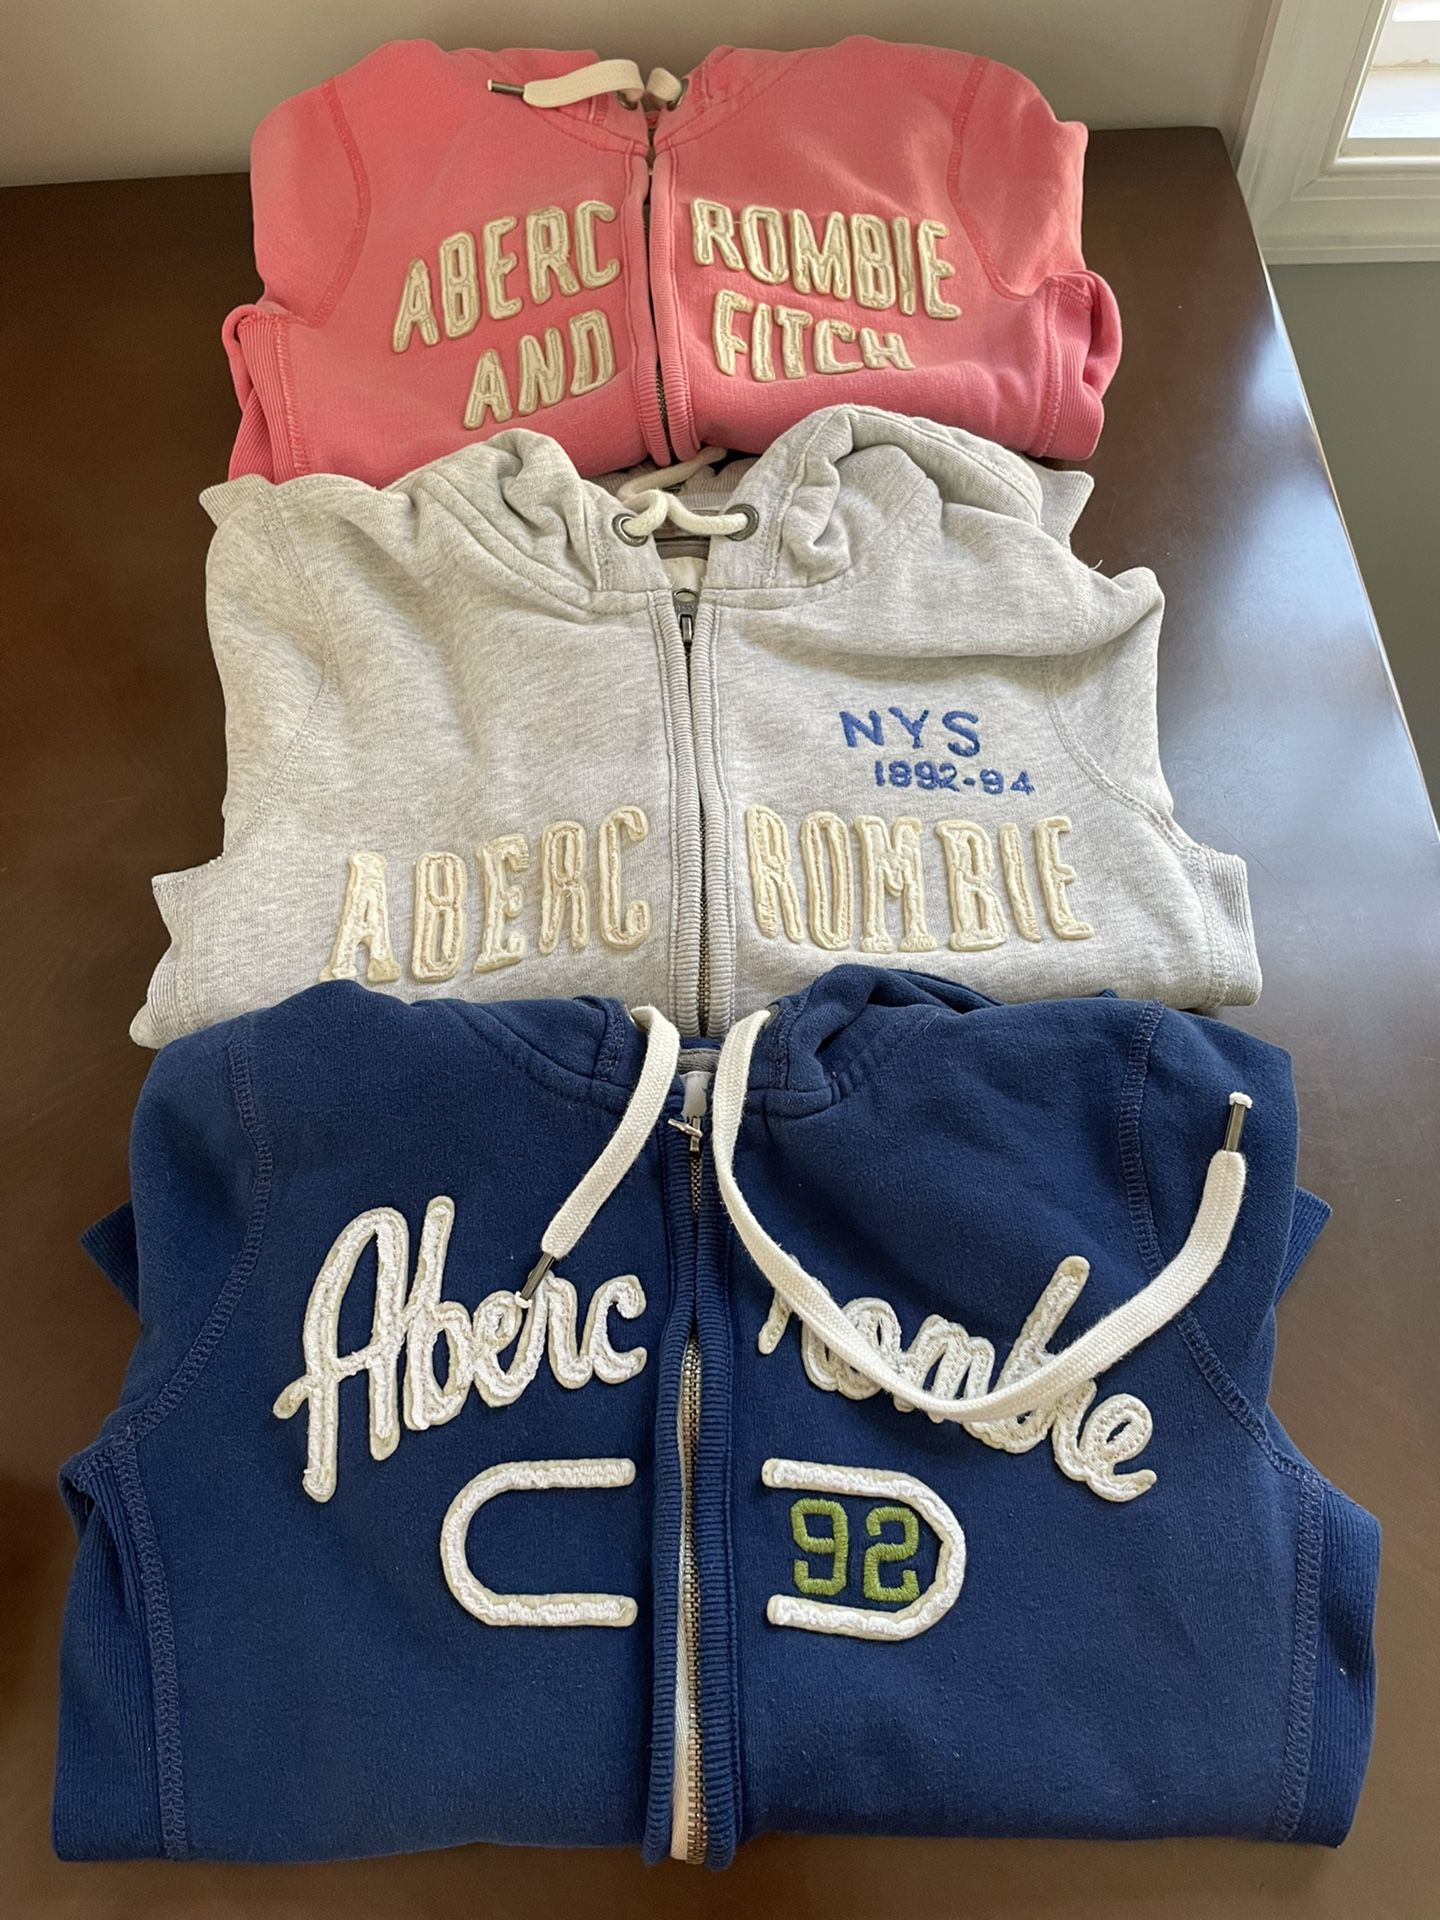 Abercrombie &Fitch